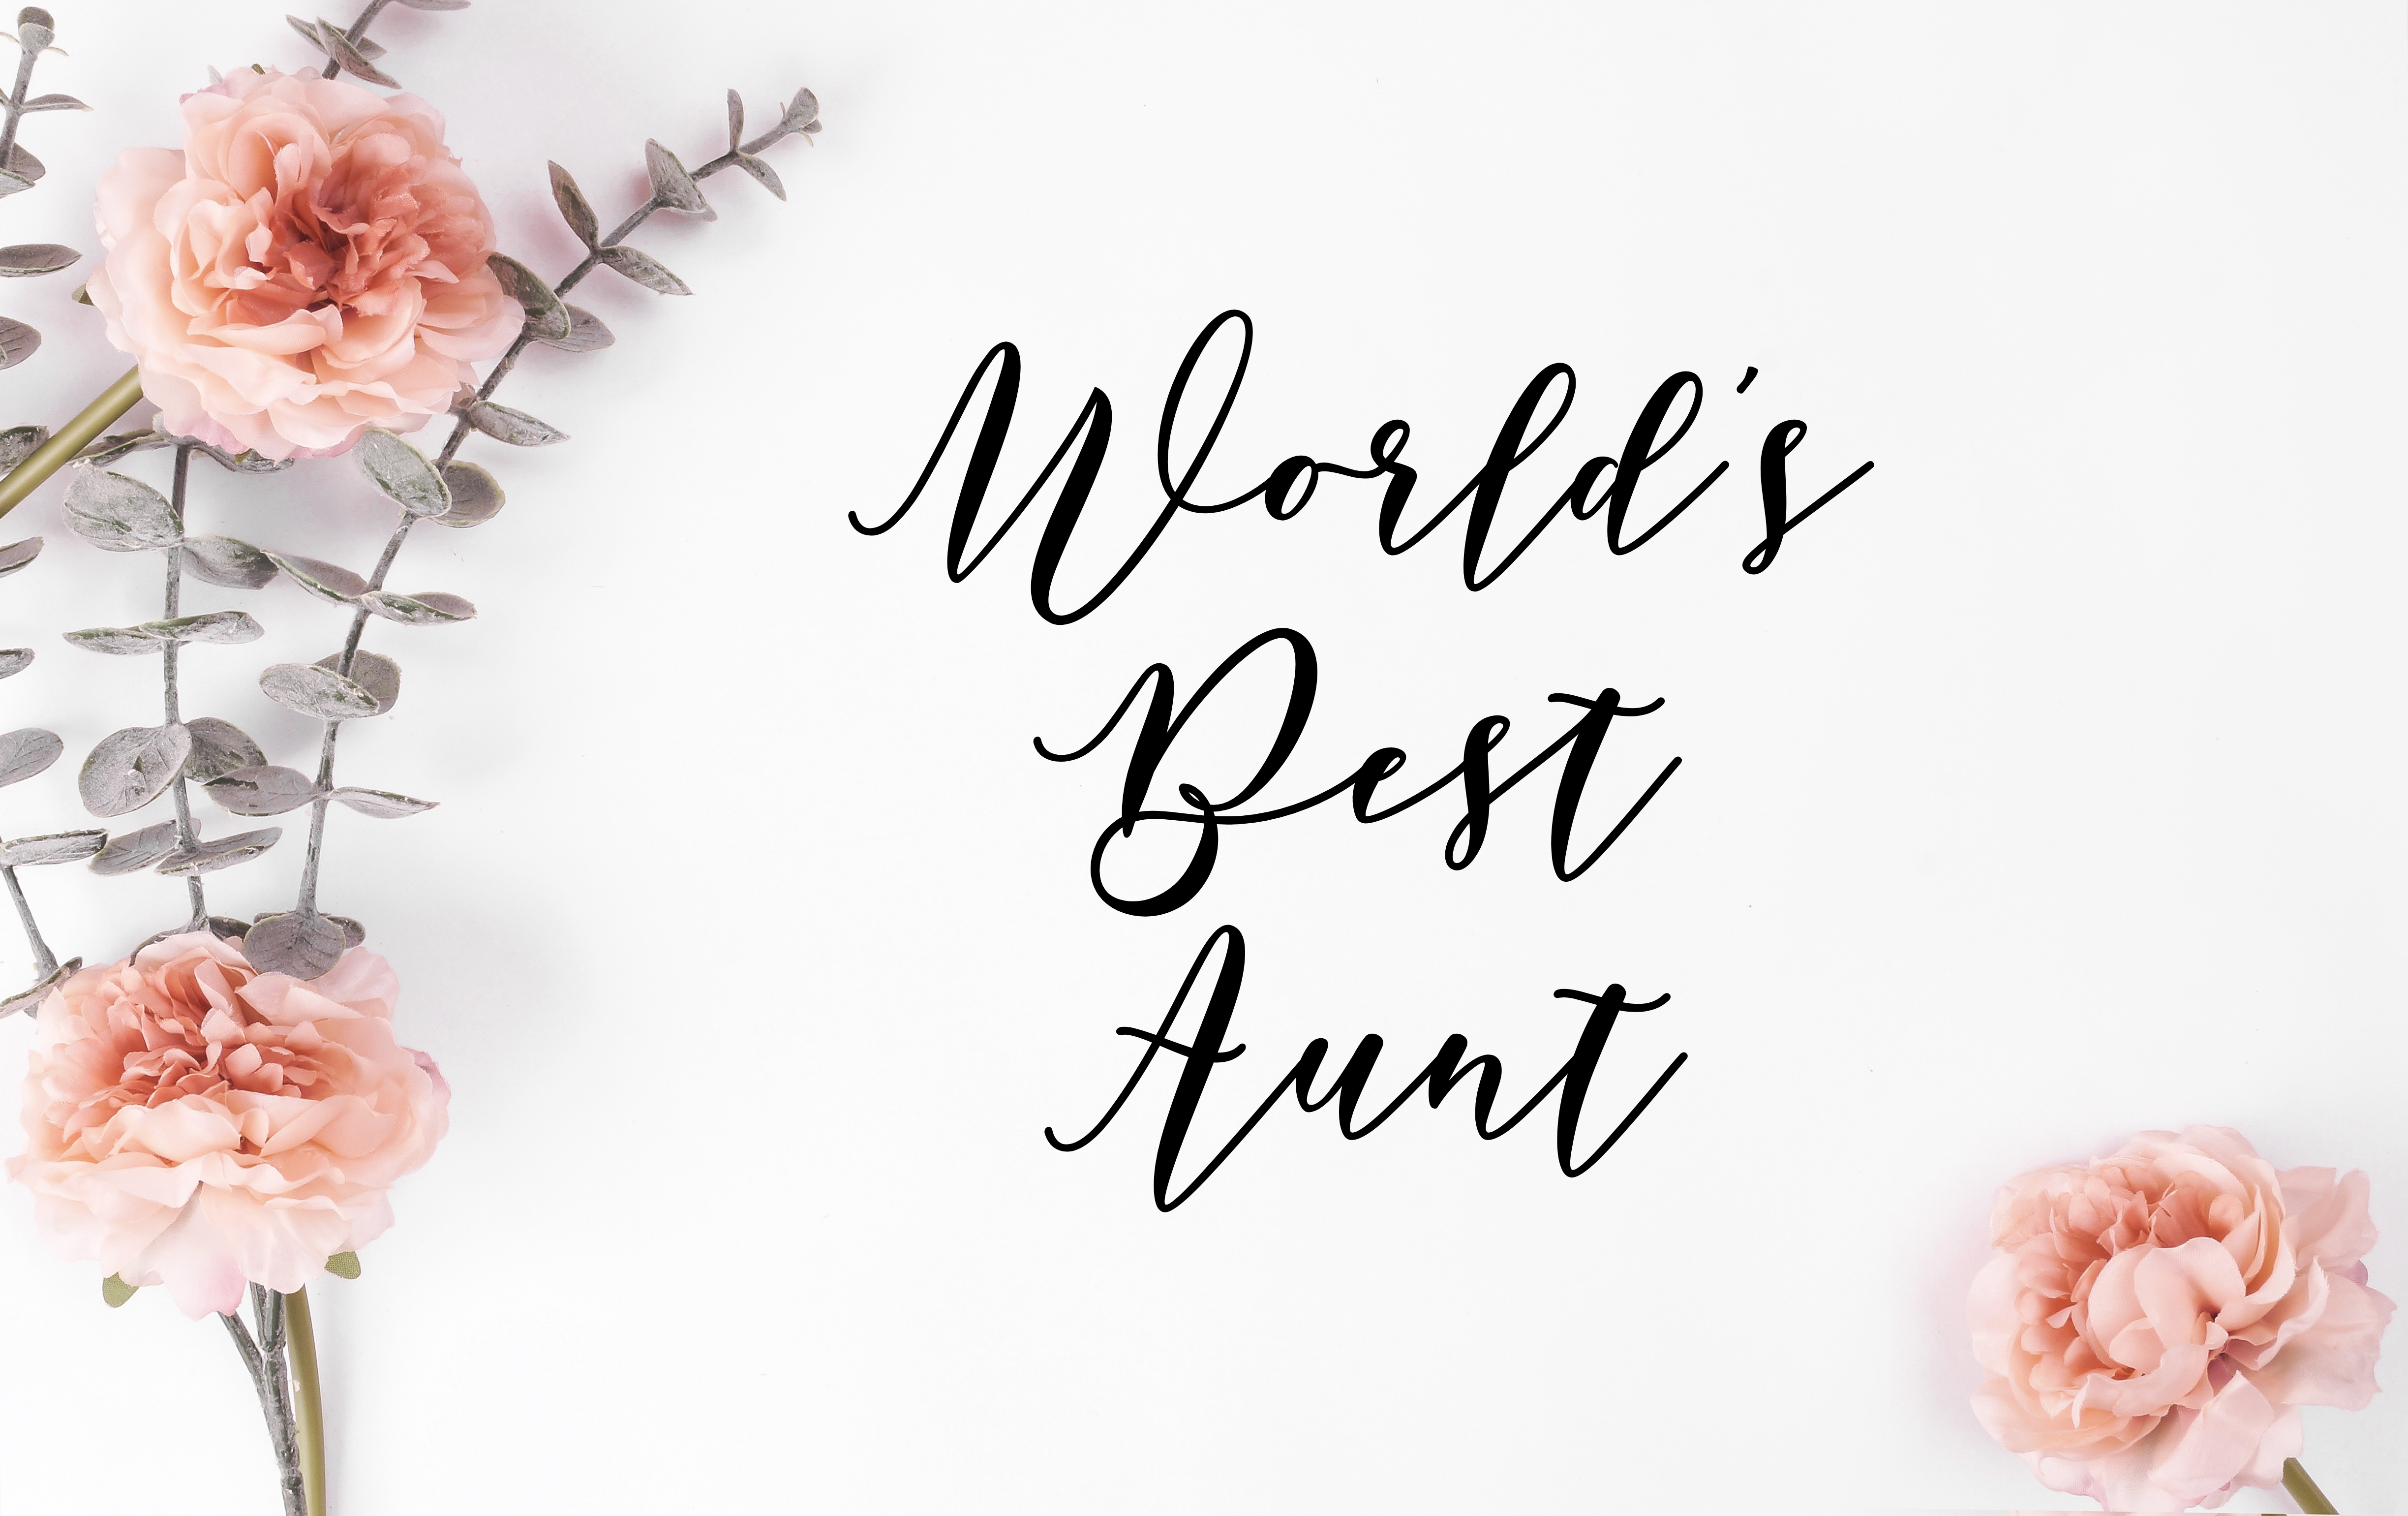 World's Best Aunt Decal - Holiday Aunt/Mother/Mom Vinyl Decals for Home, Gifts, Businesses and More!